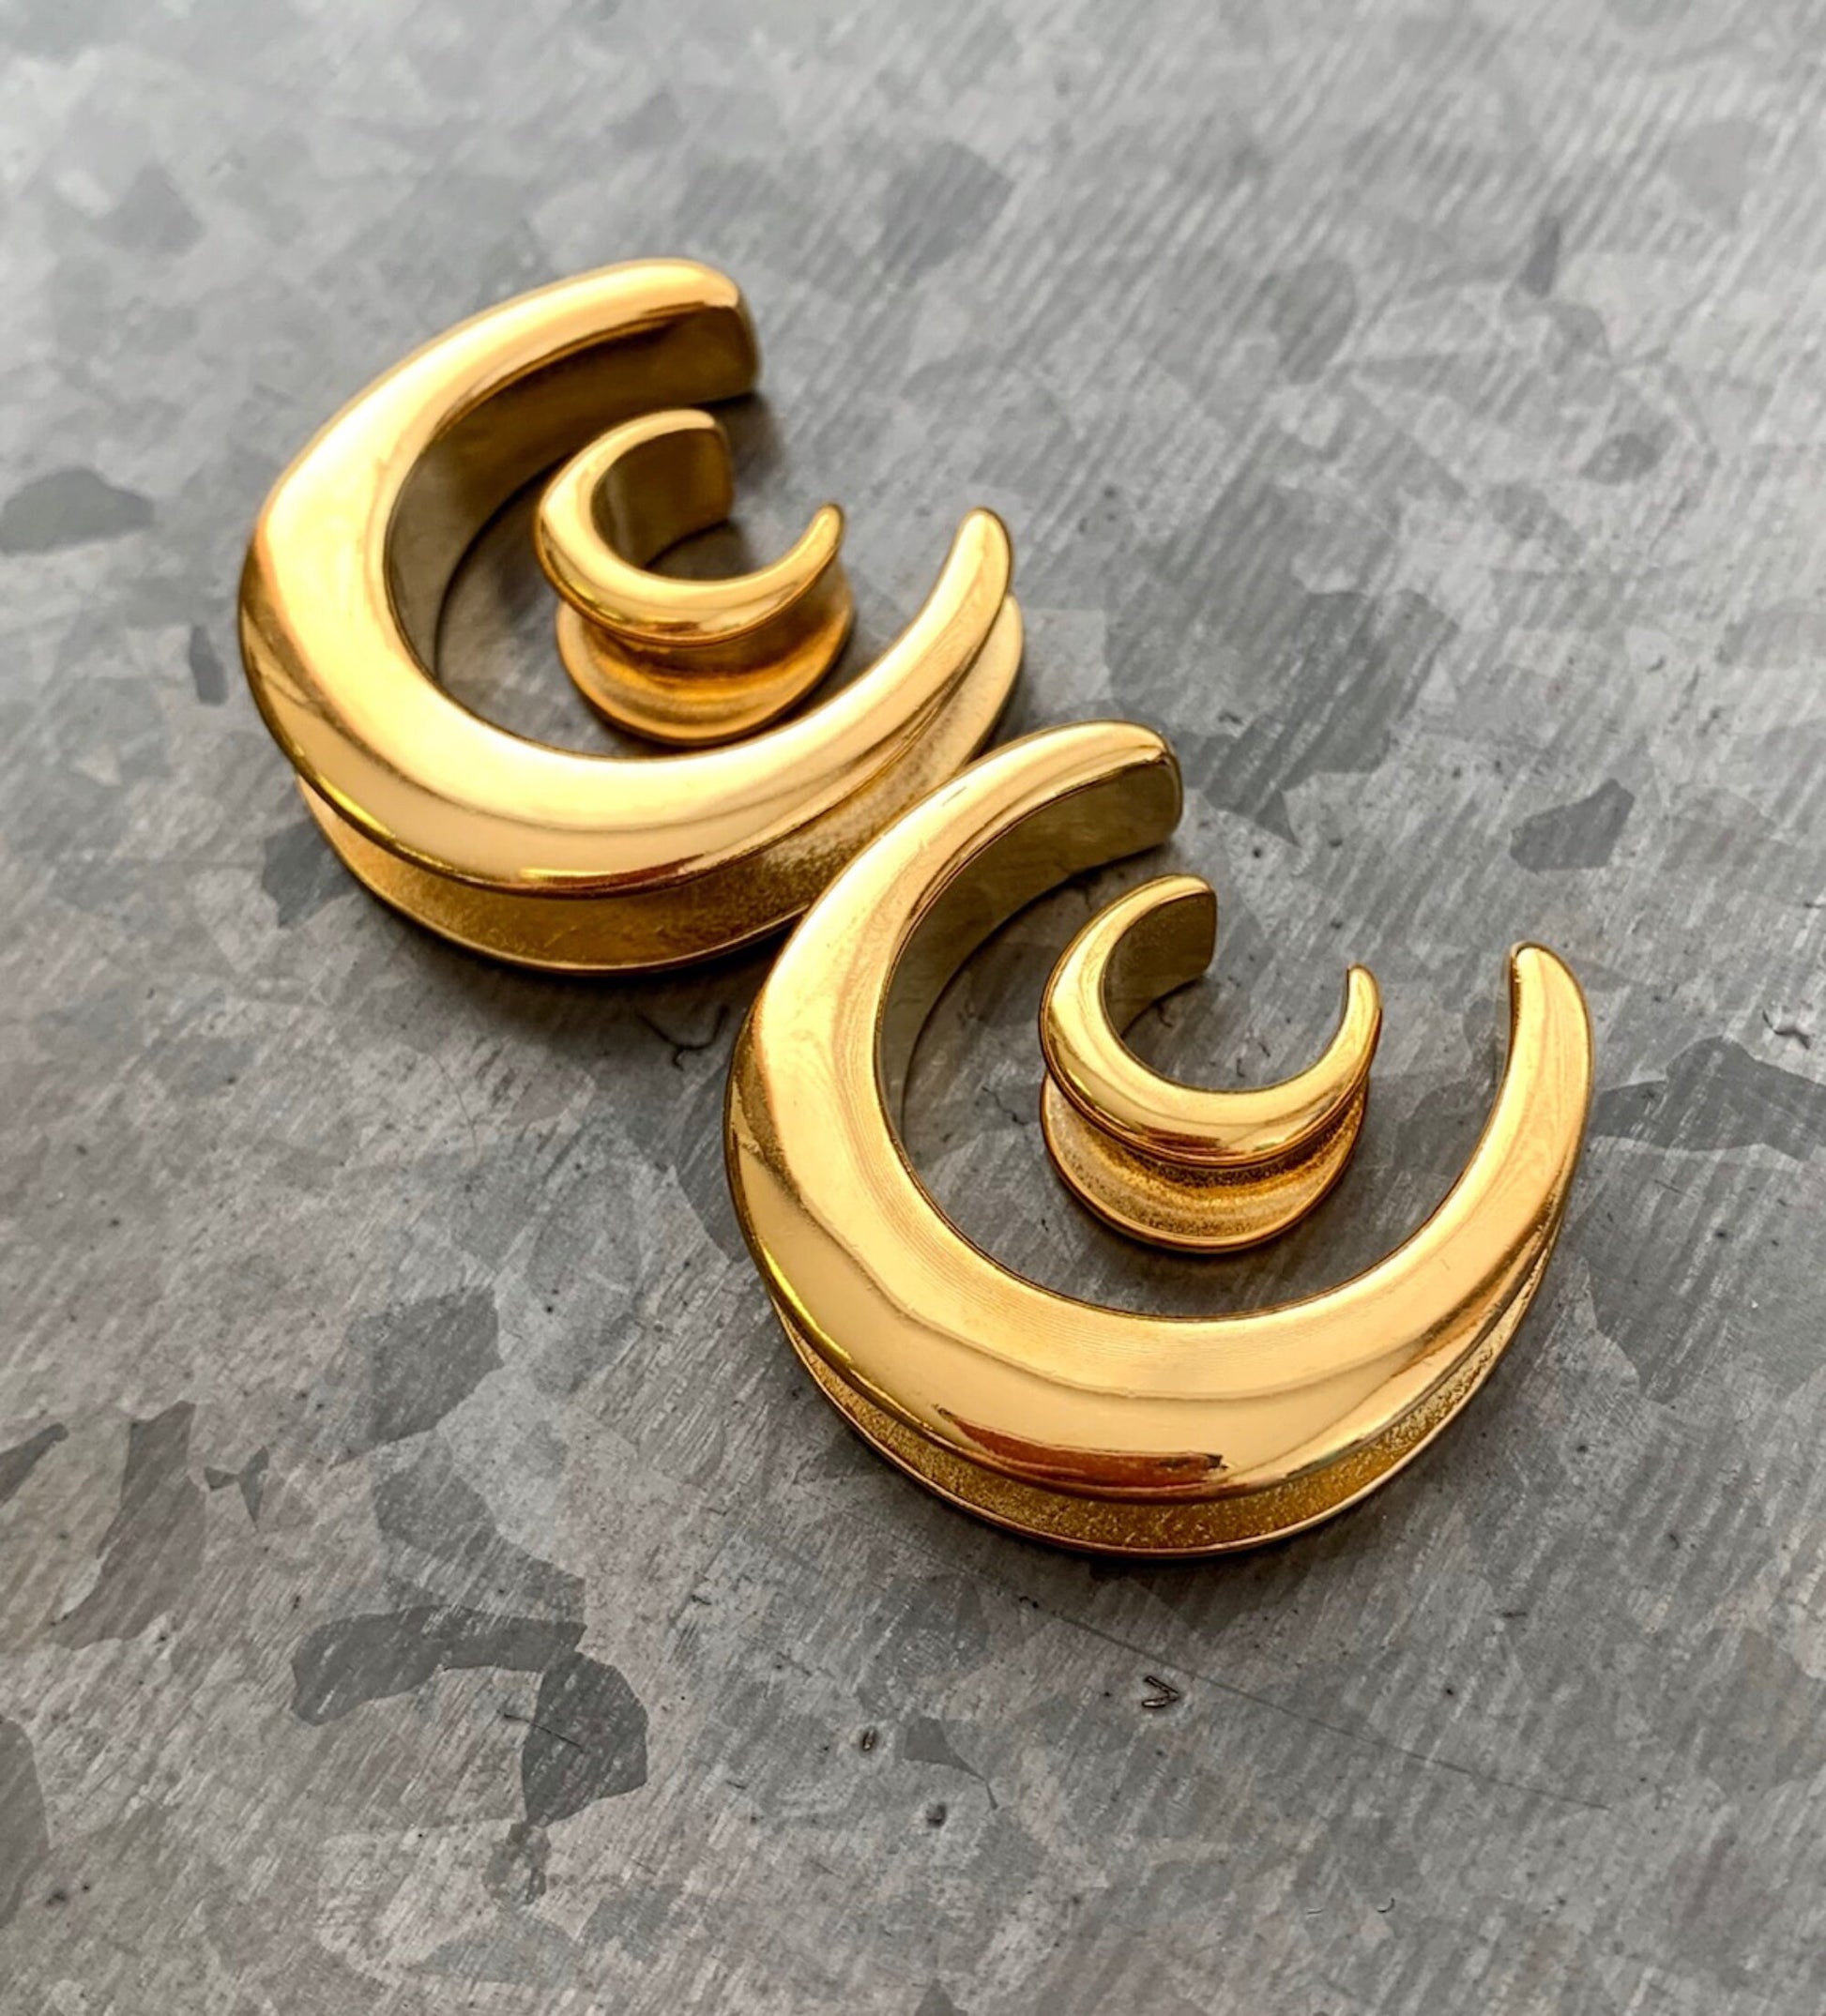 Pair of Stunning Gold Saddle Surgical Steel Ear Spreaders Hanger-Tunnels/Plugs - Gauges 00g (10mm) thru 1" (25mm) available!